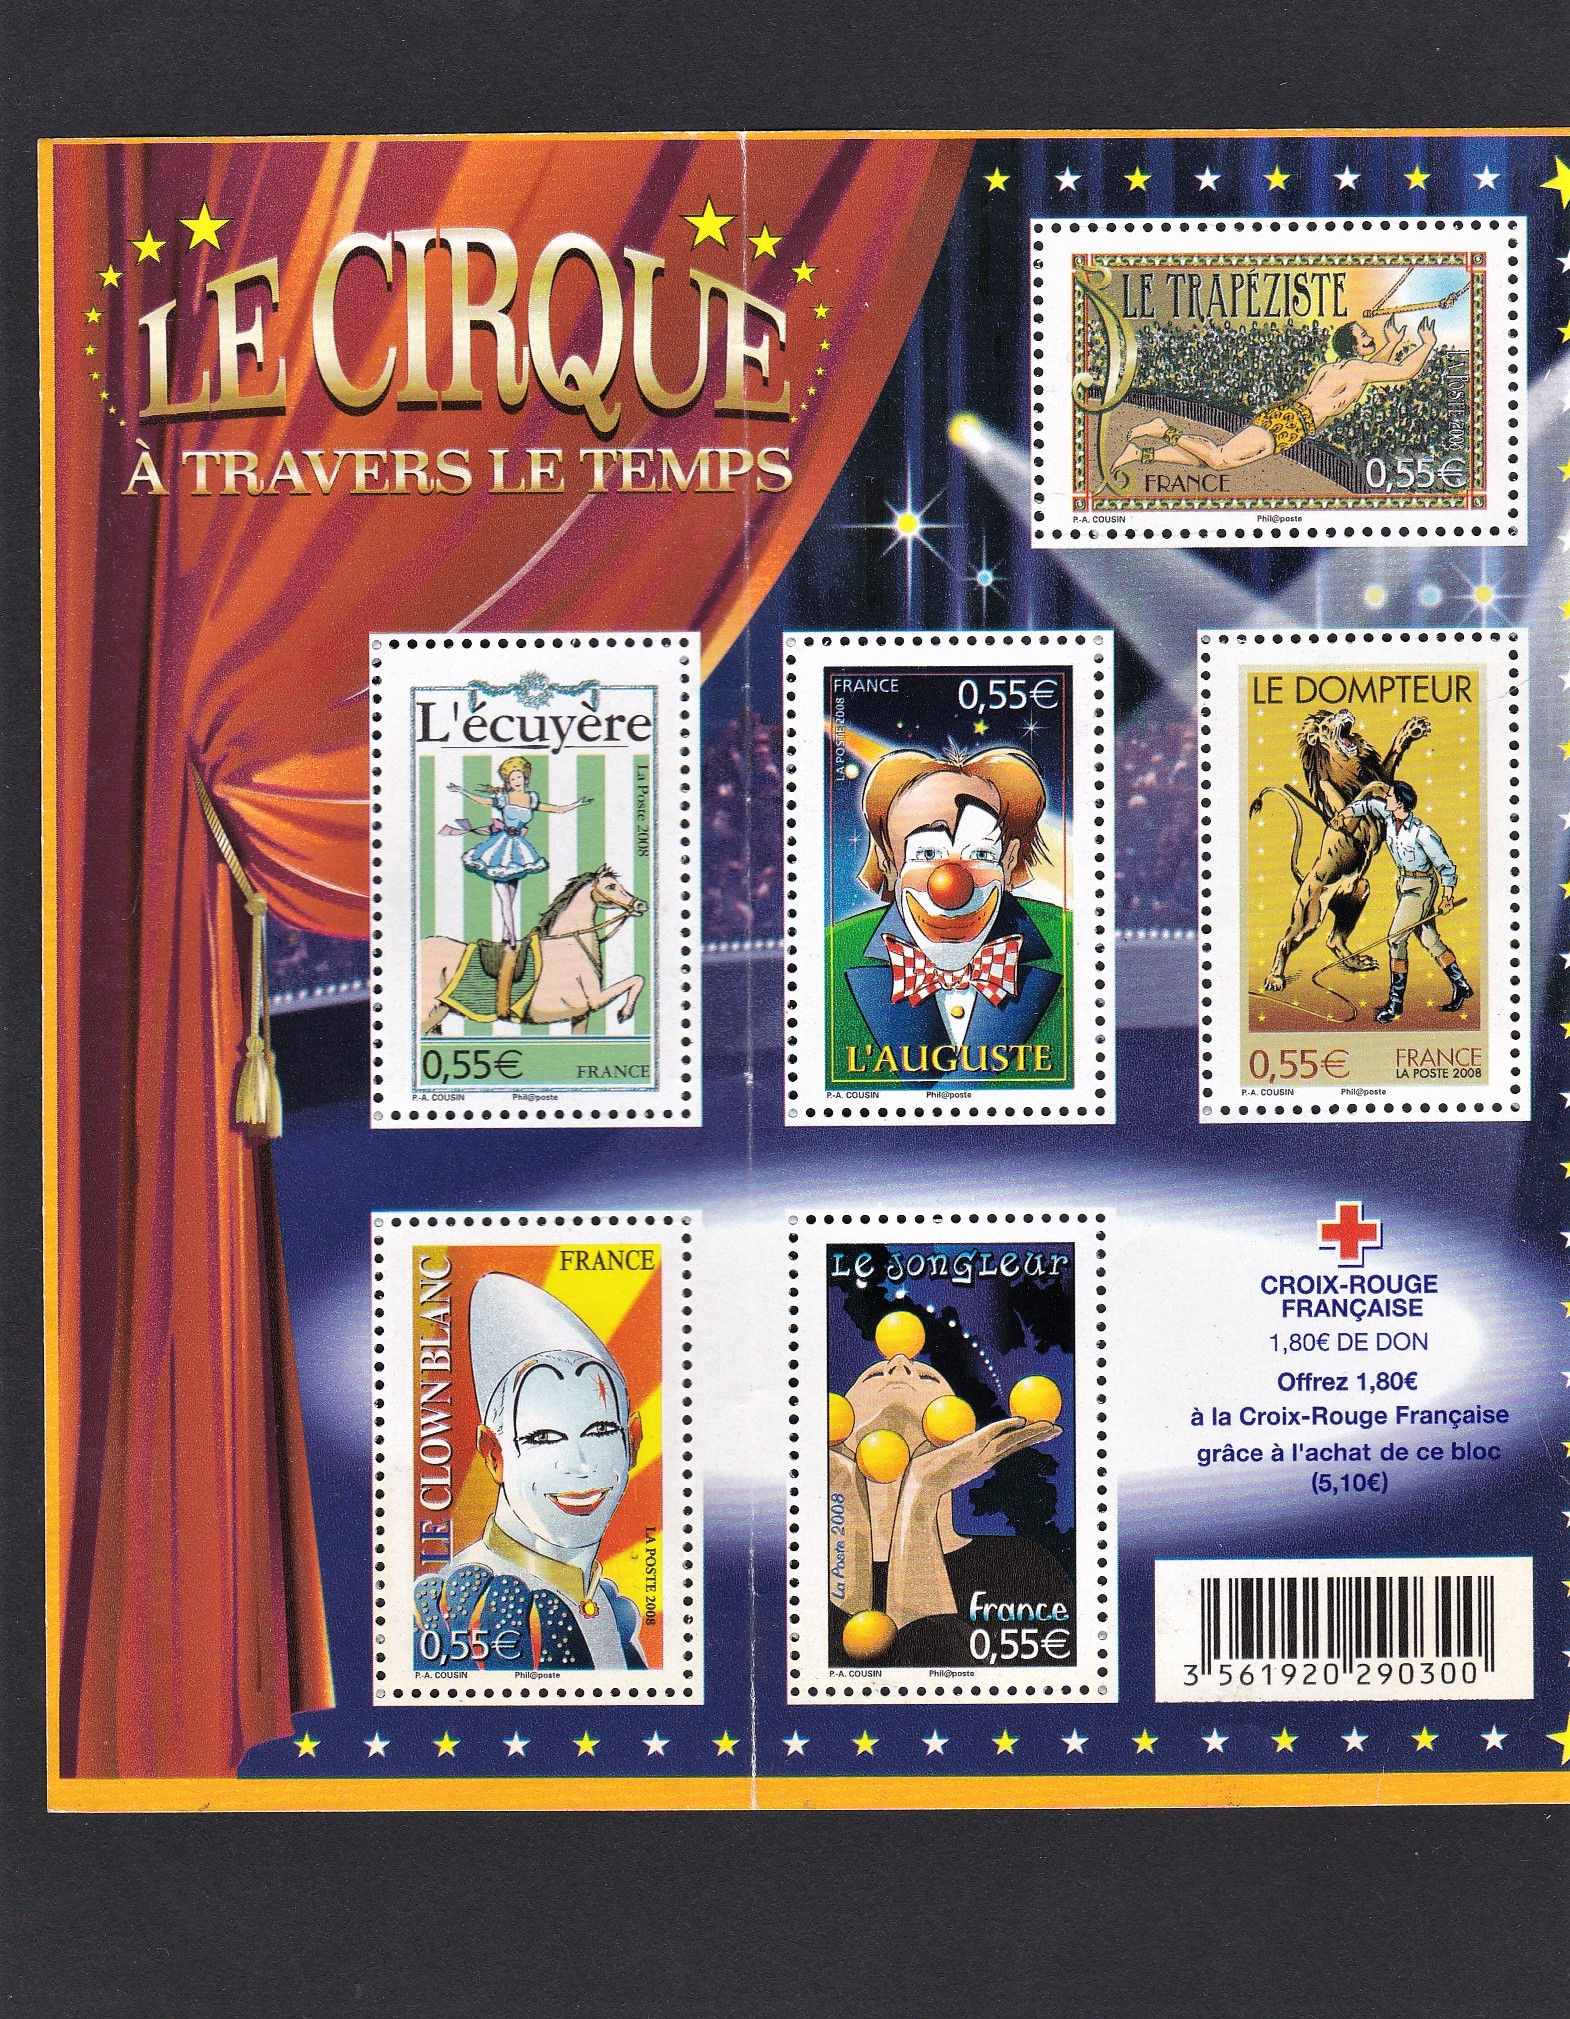 France 2008 Circus u/m miniature sheet MS4482 sold with premium for French Red Cross, comprises S.G.